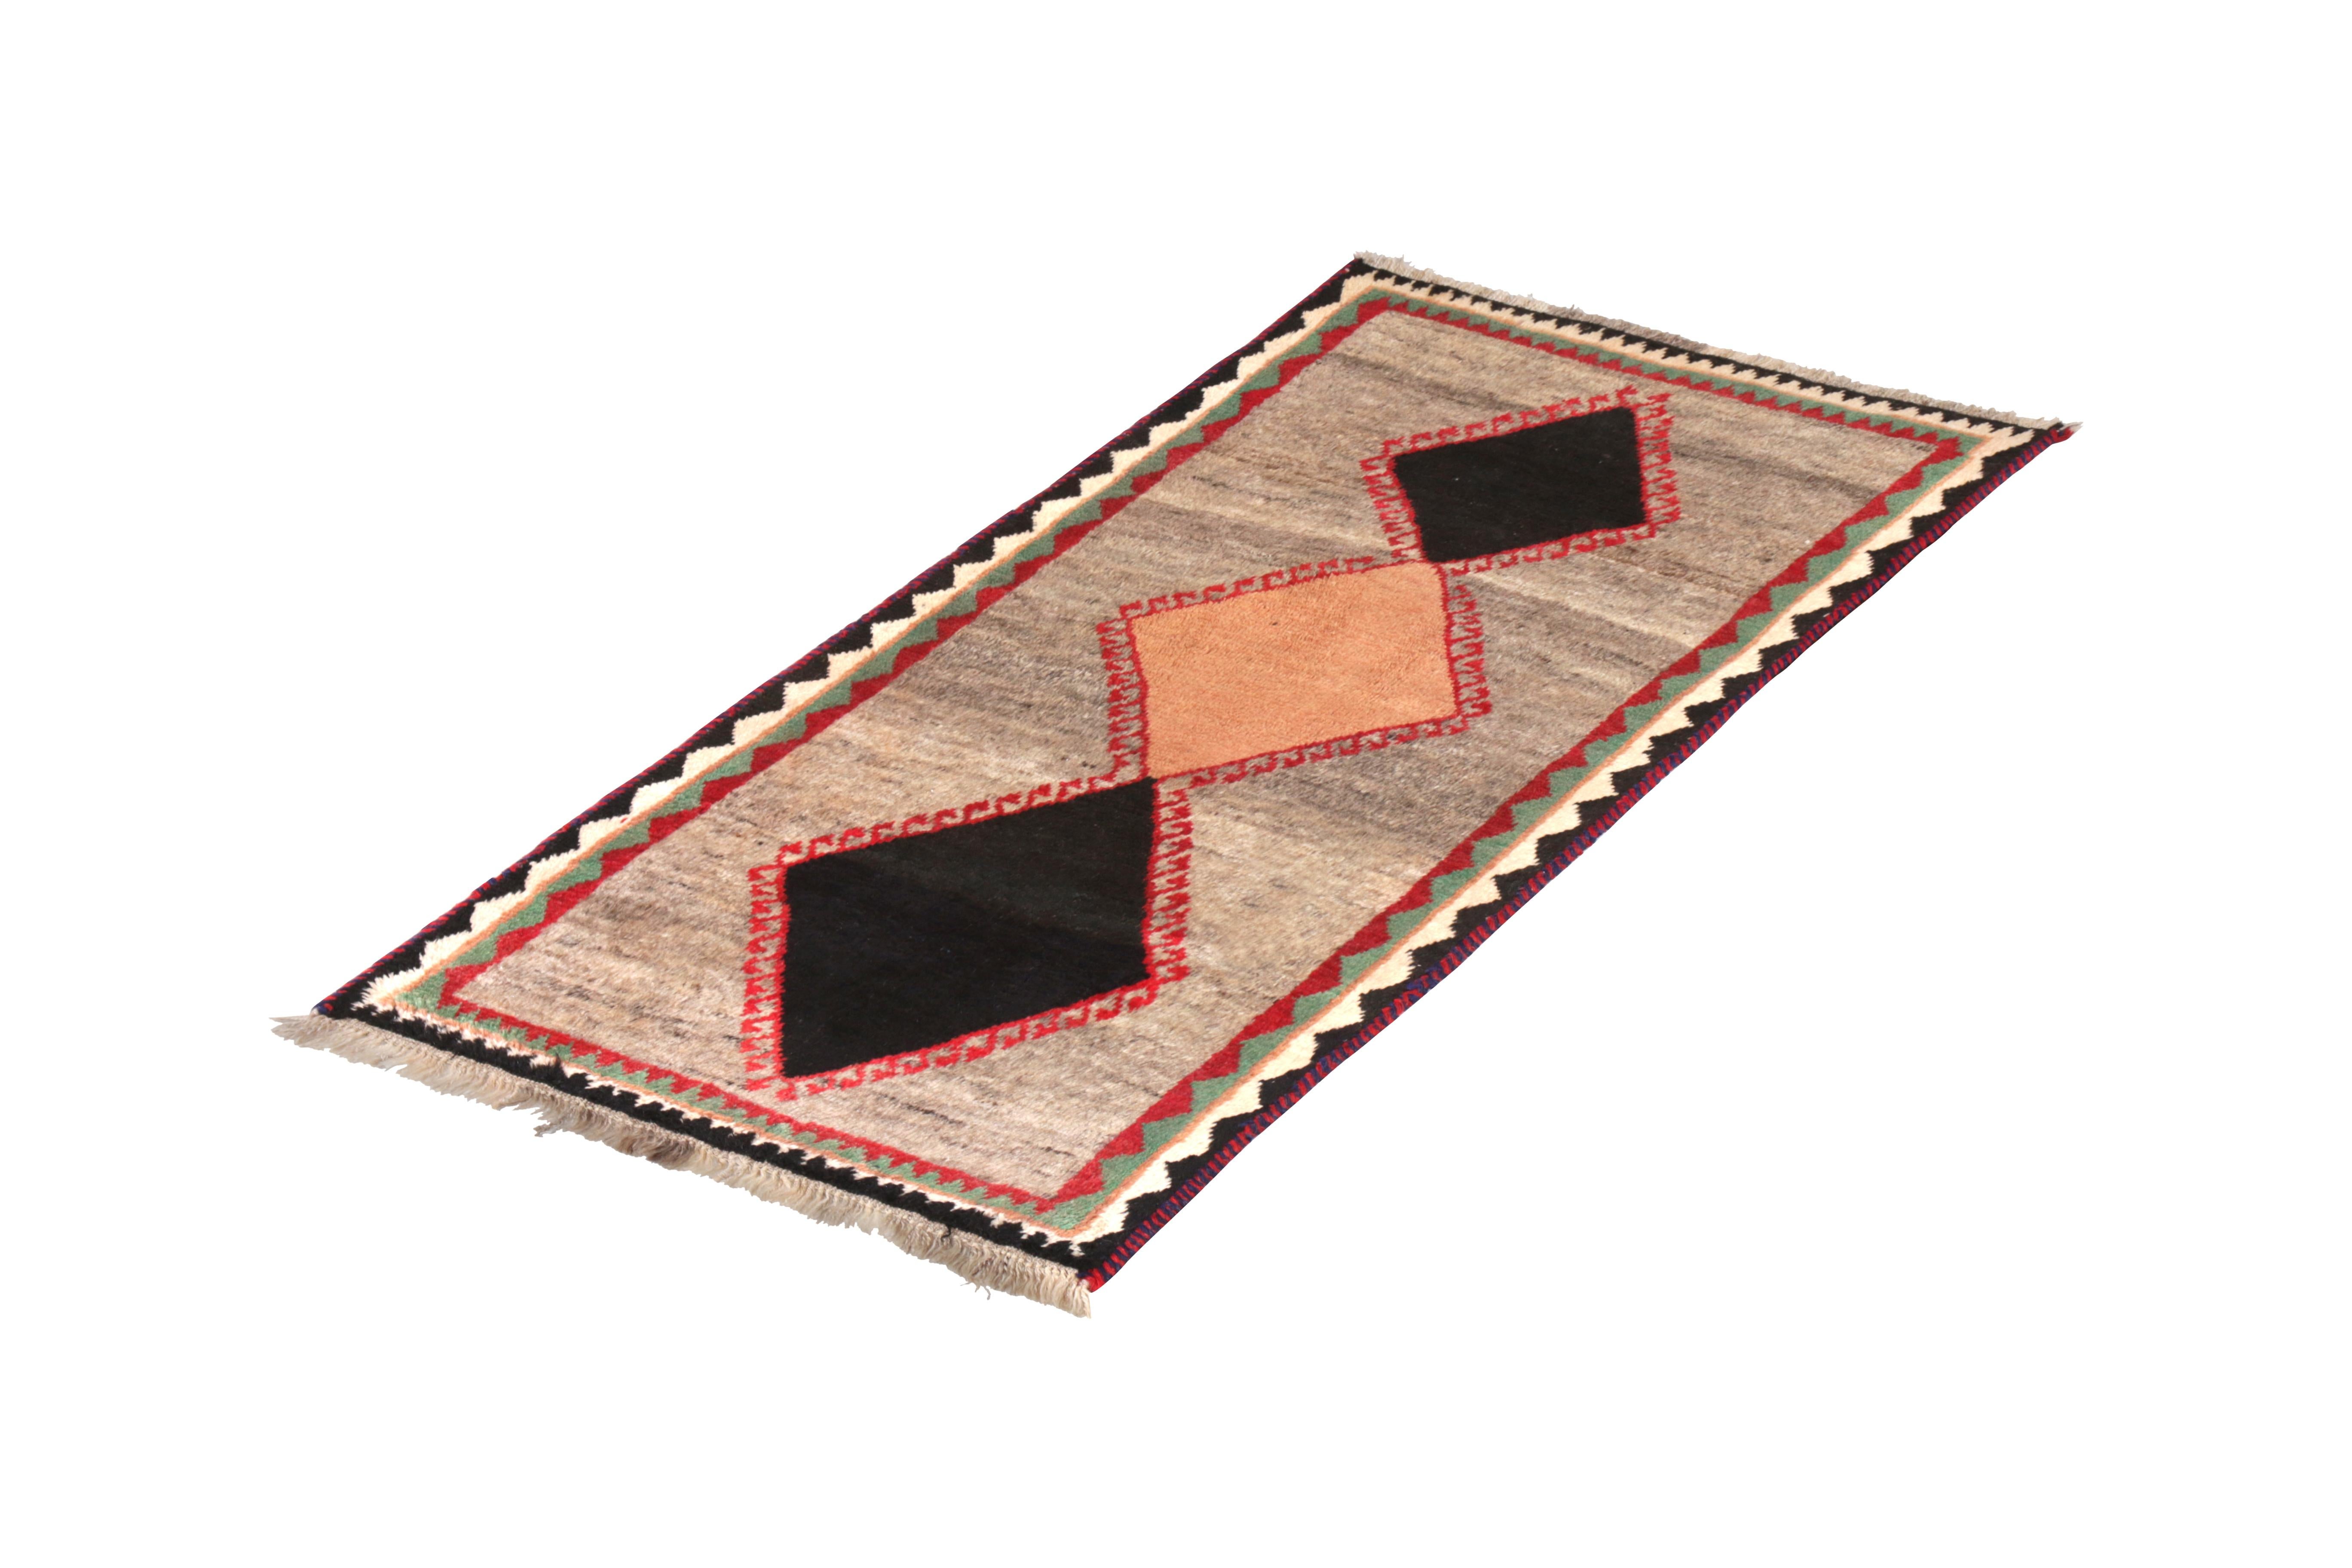 Hand knotted in wool pile originating circa 1950-1960, this vintage Persian runner connotes a mid-century tribal Gabbeh rug design in a lively transitional colorway, playing black, beige-brown, and other tribal hues against a silver-gray field